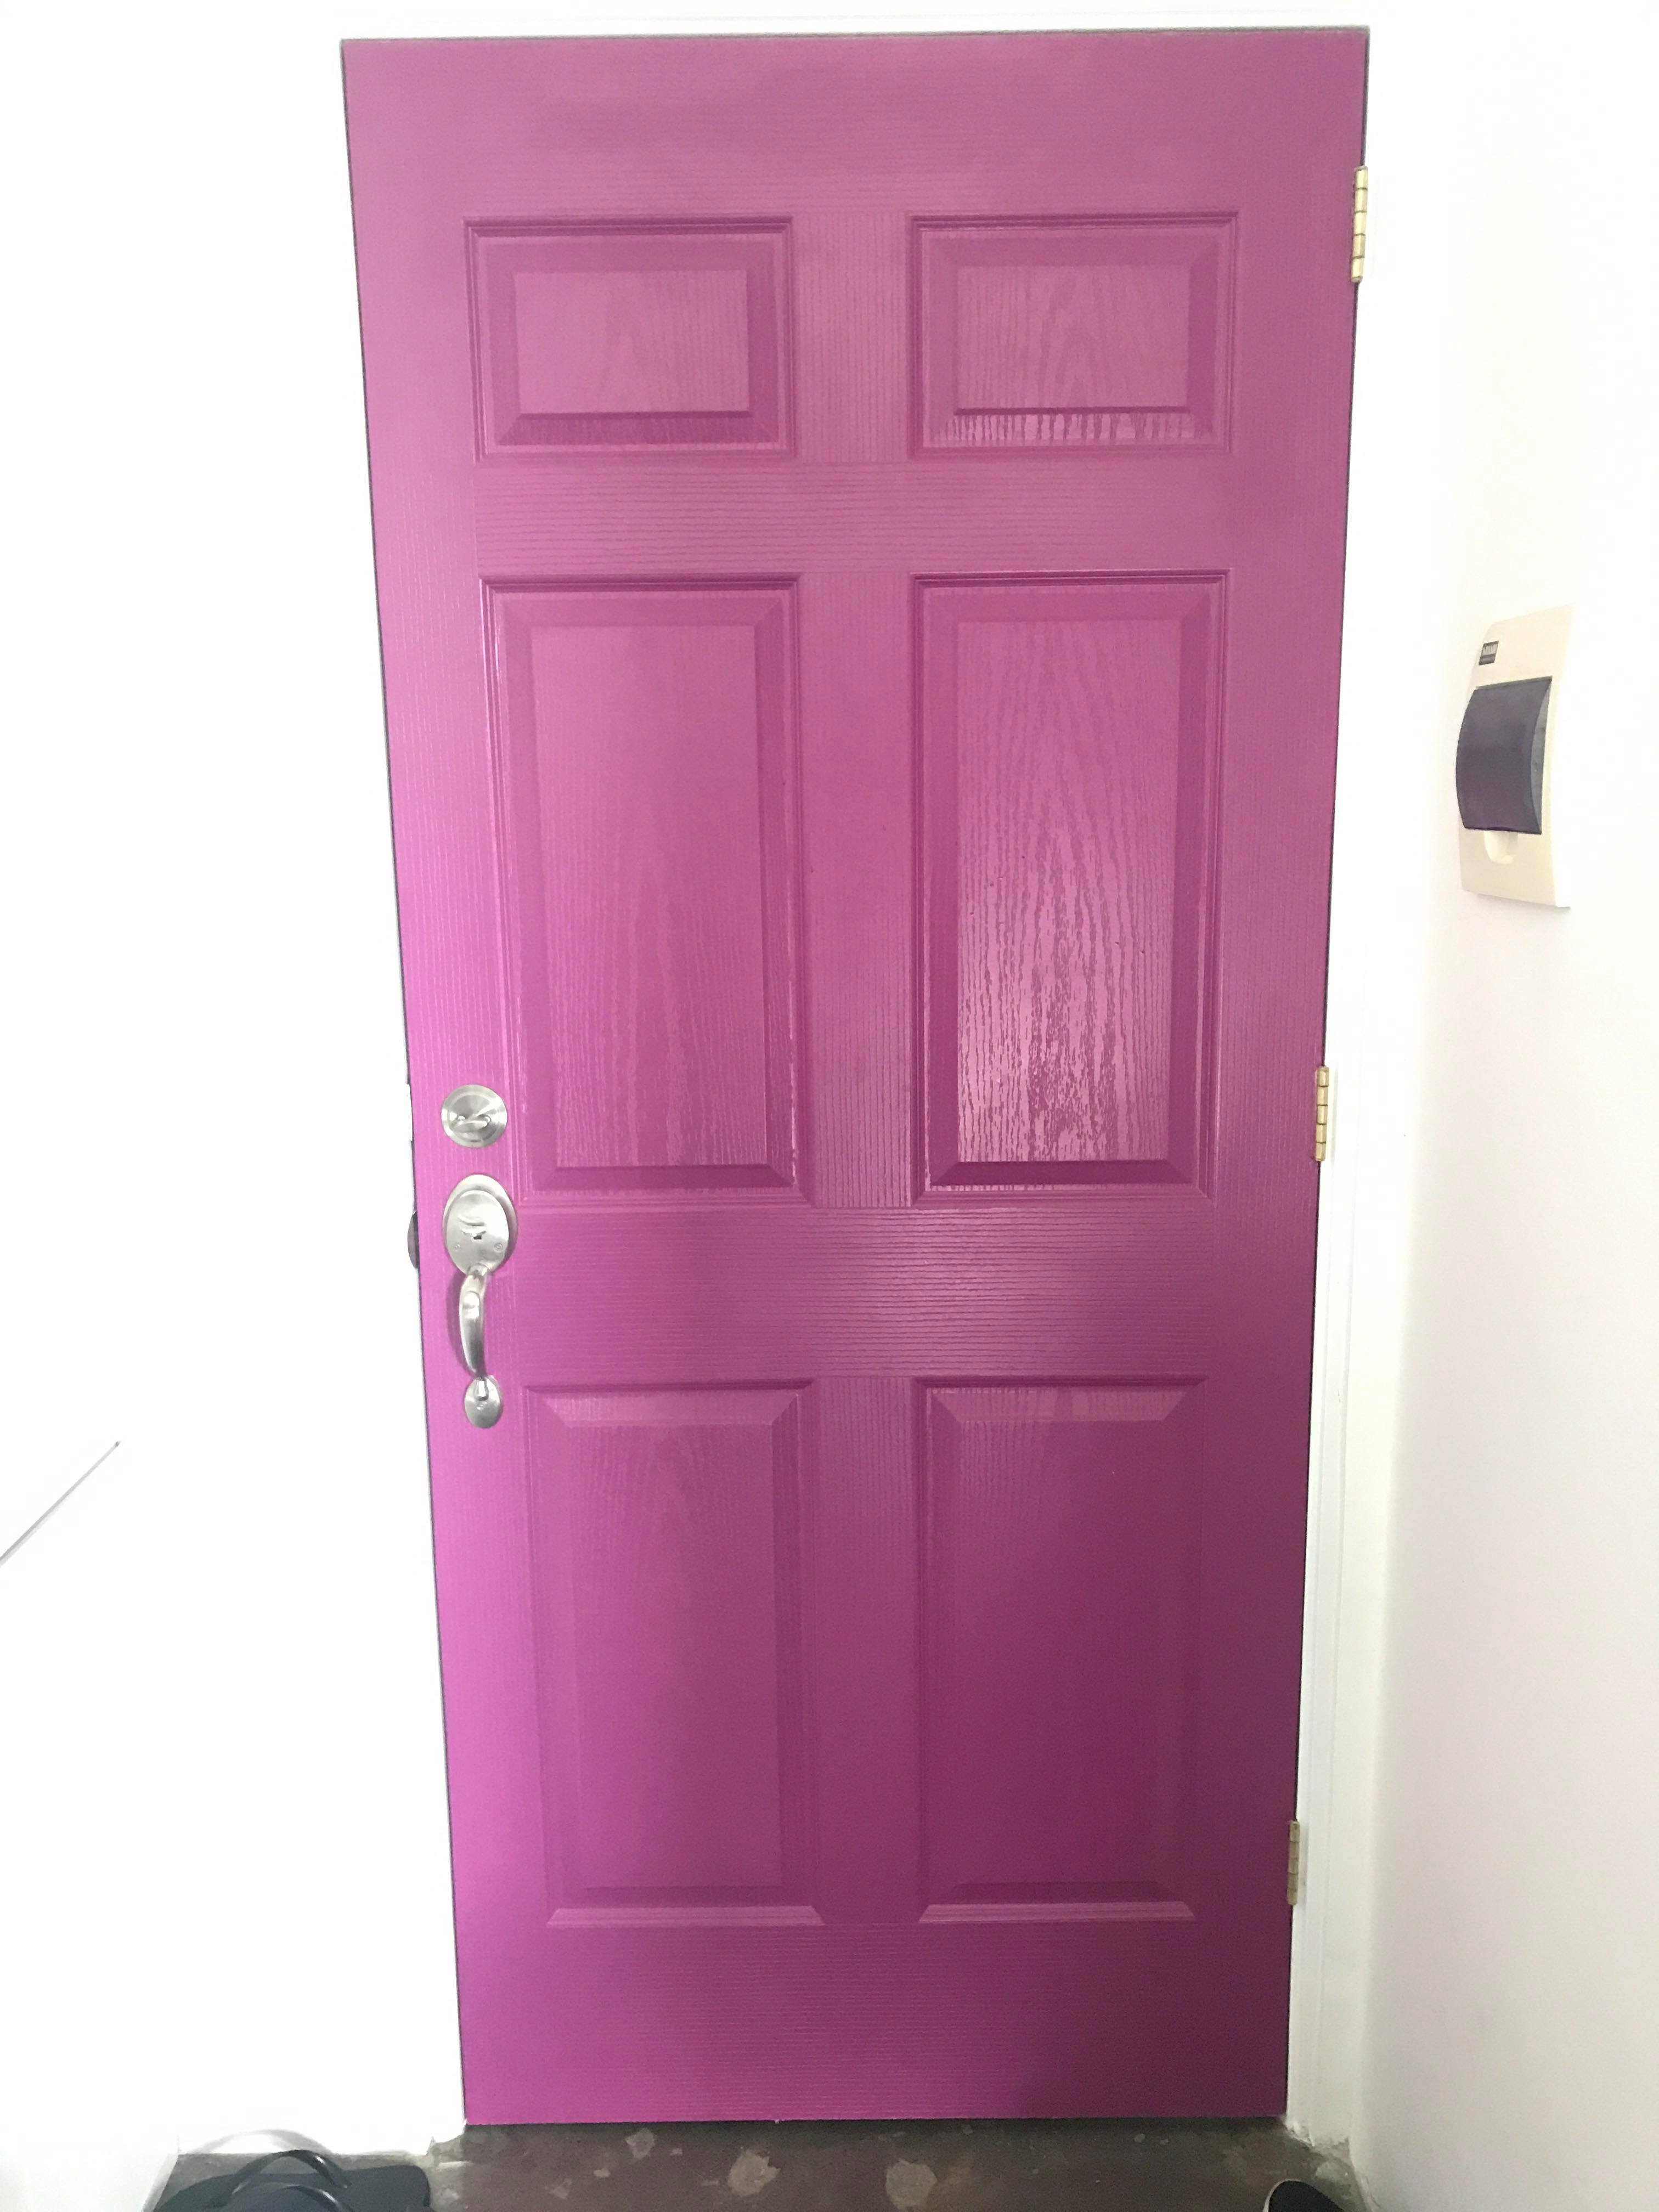 Let Our Year 2018 Burst With Colors. Let's Start with Our Doors.